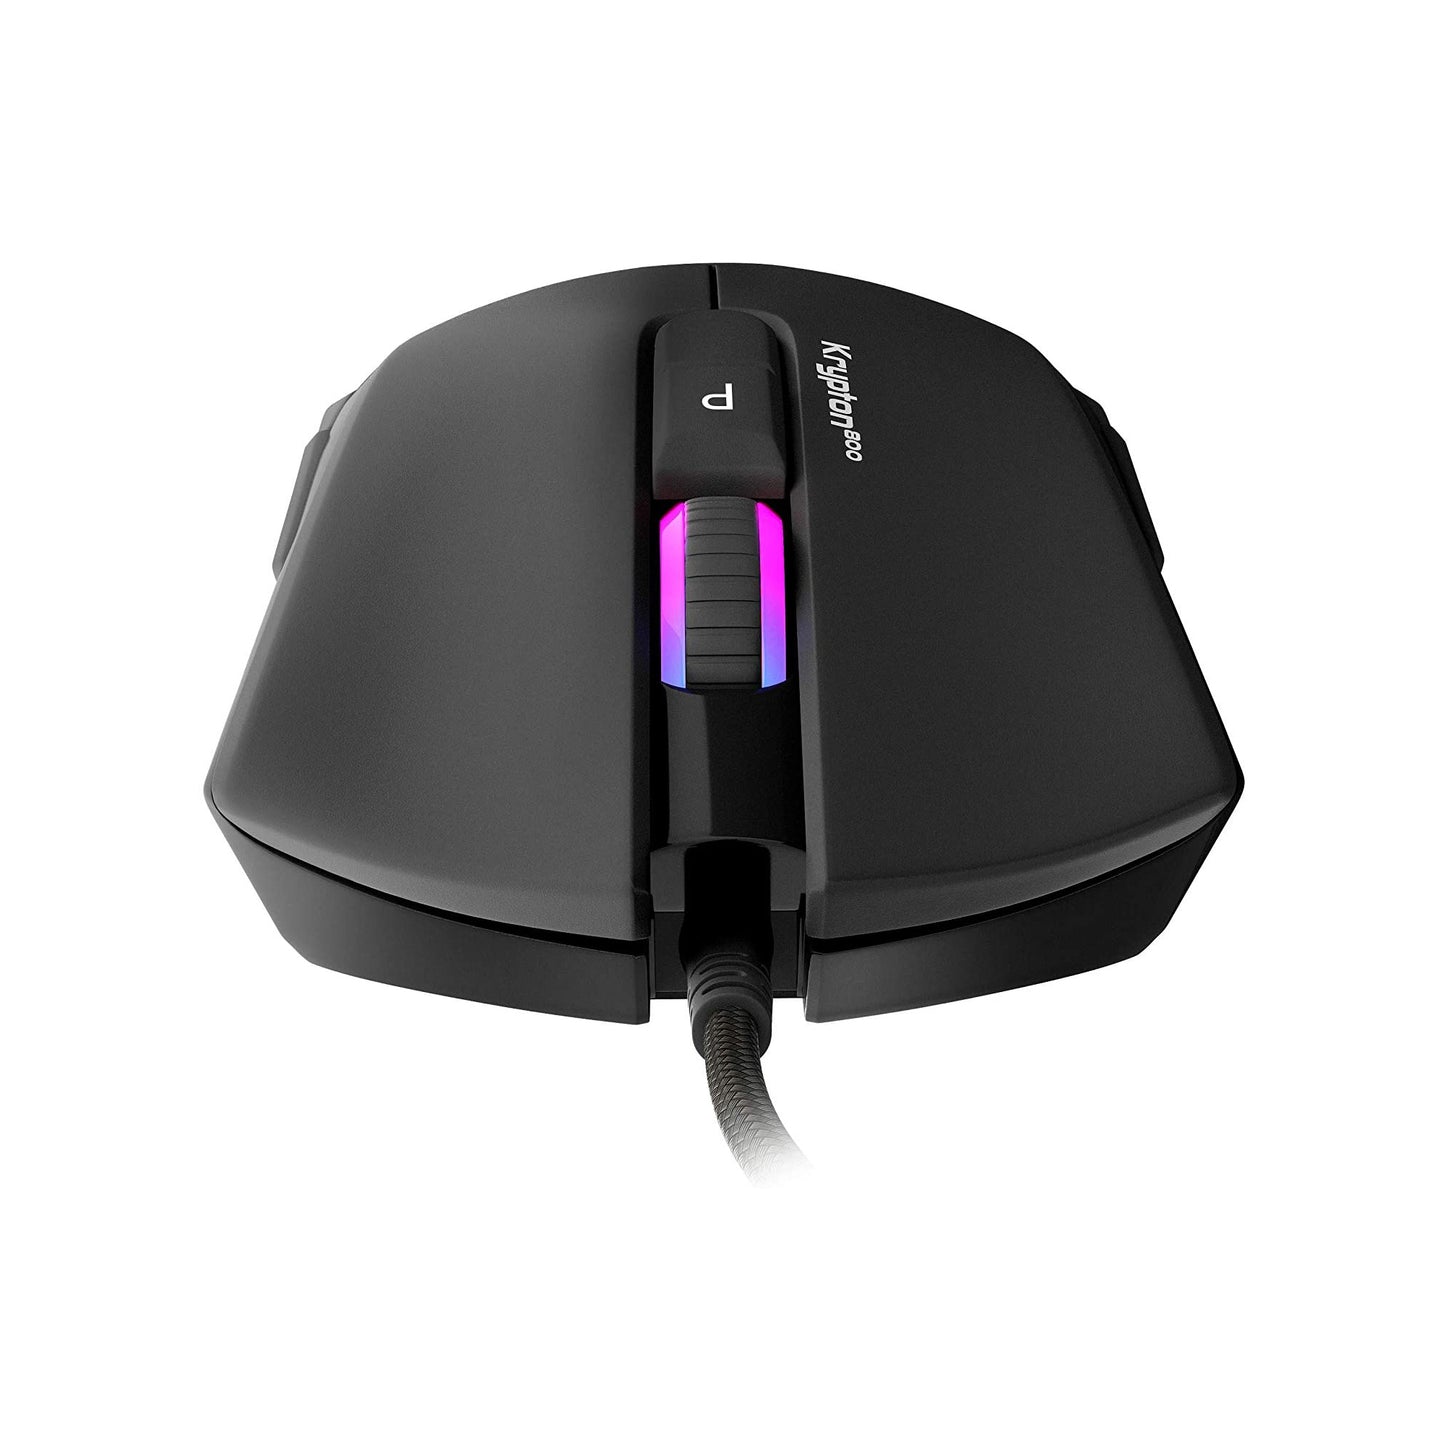 Genesis Krypton 800 NMG-0966 Optical Gaming Mouse (New) Best laptop mouse, computer mouse, gaming mouse, professional mouse, mouse for sale in Lebanon, mouse in Lebanon, RGB mouse, laptops king lebanon